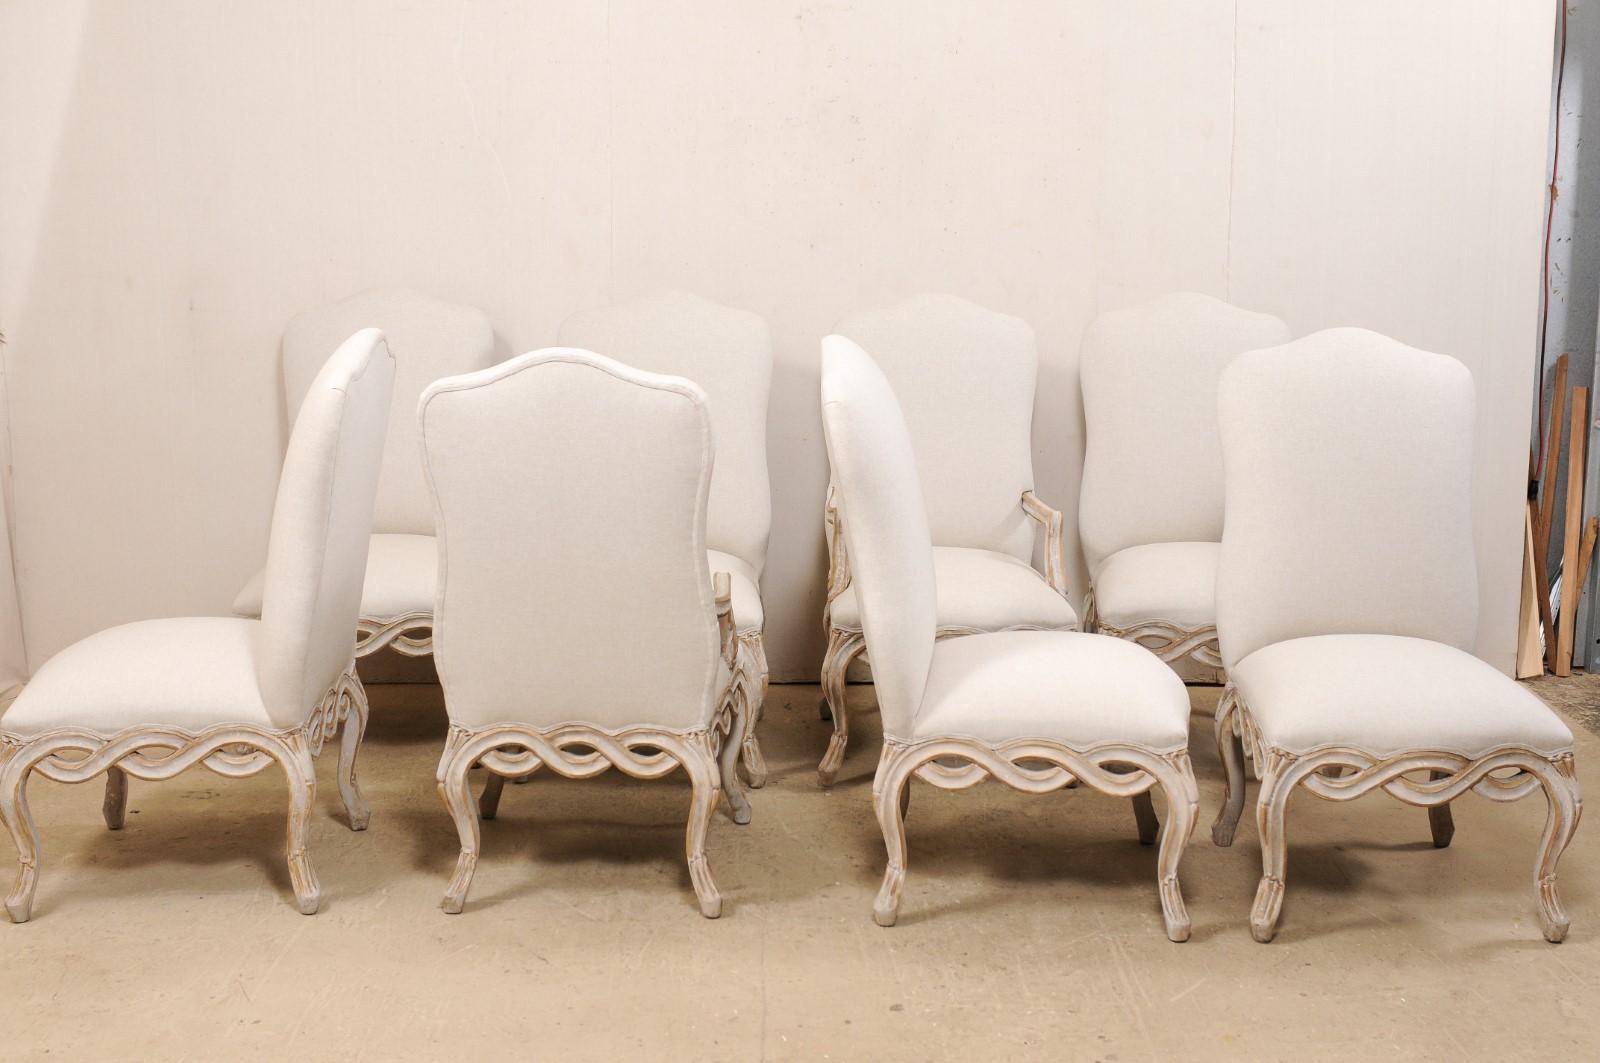 Upholstery Set of 8 Venetian-Style Upholstered Dining Chairs w/ Pierce-Carved Ribbon Skirts